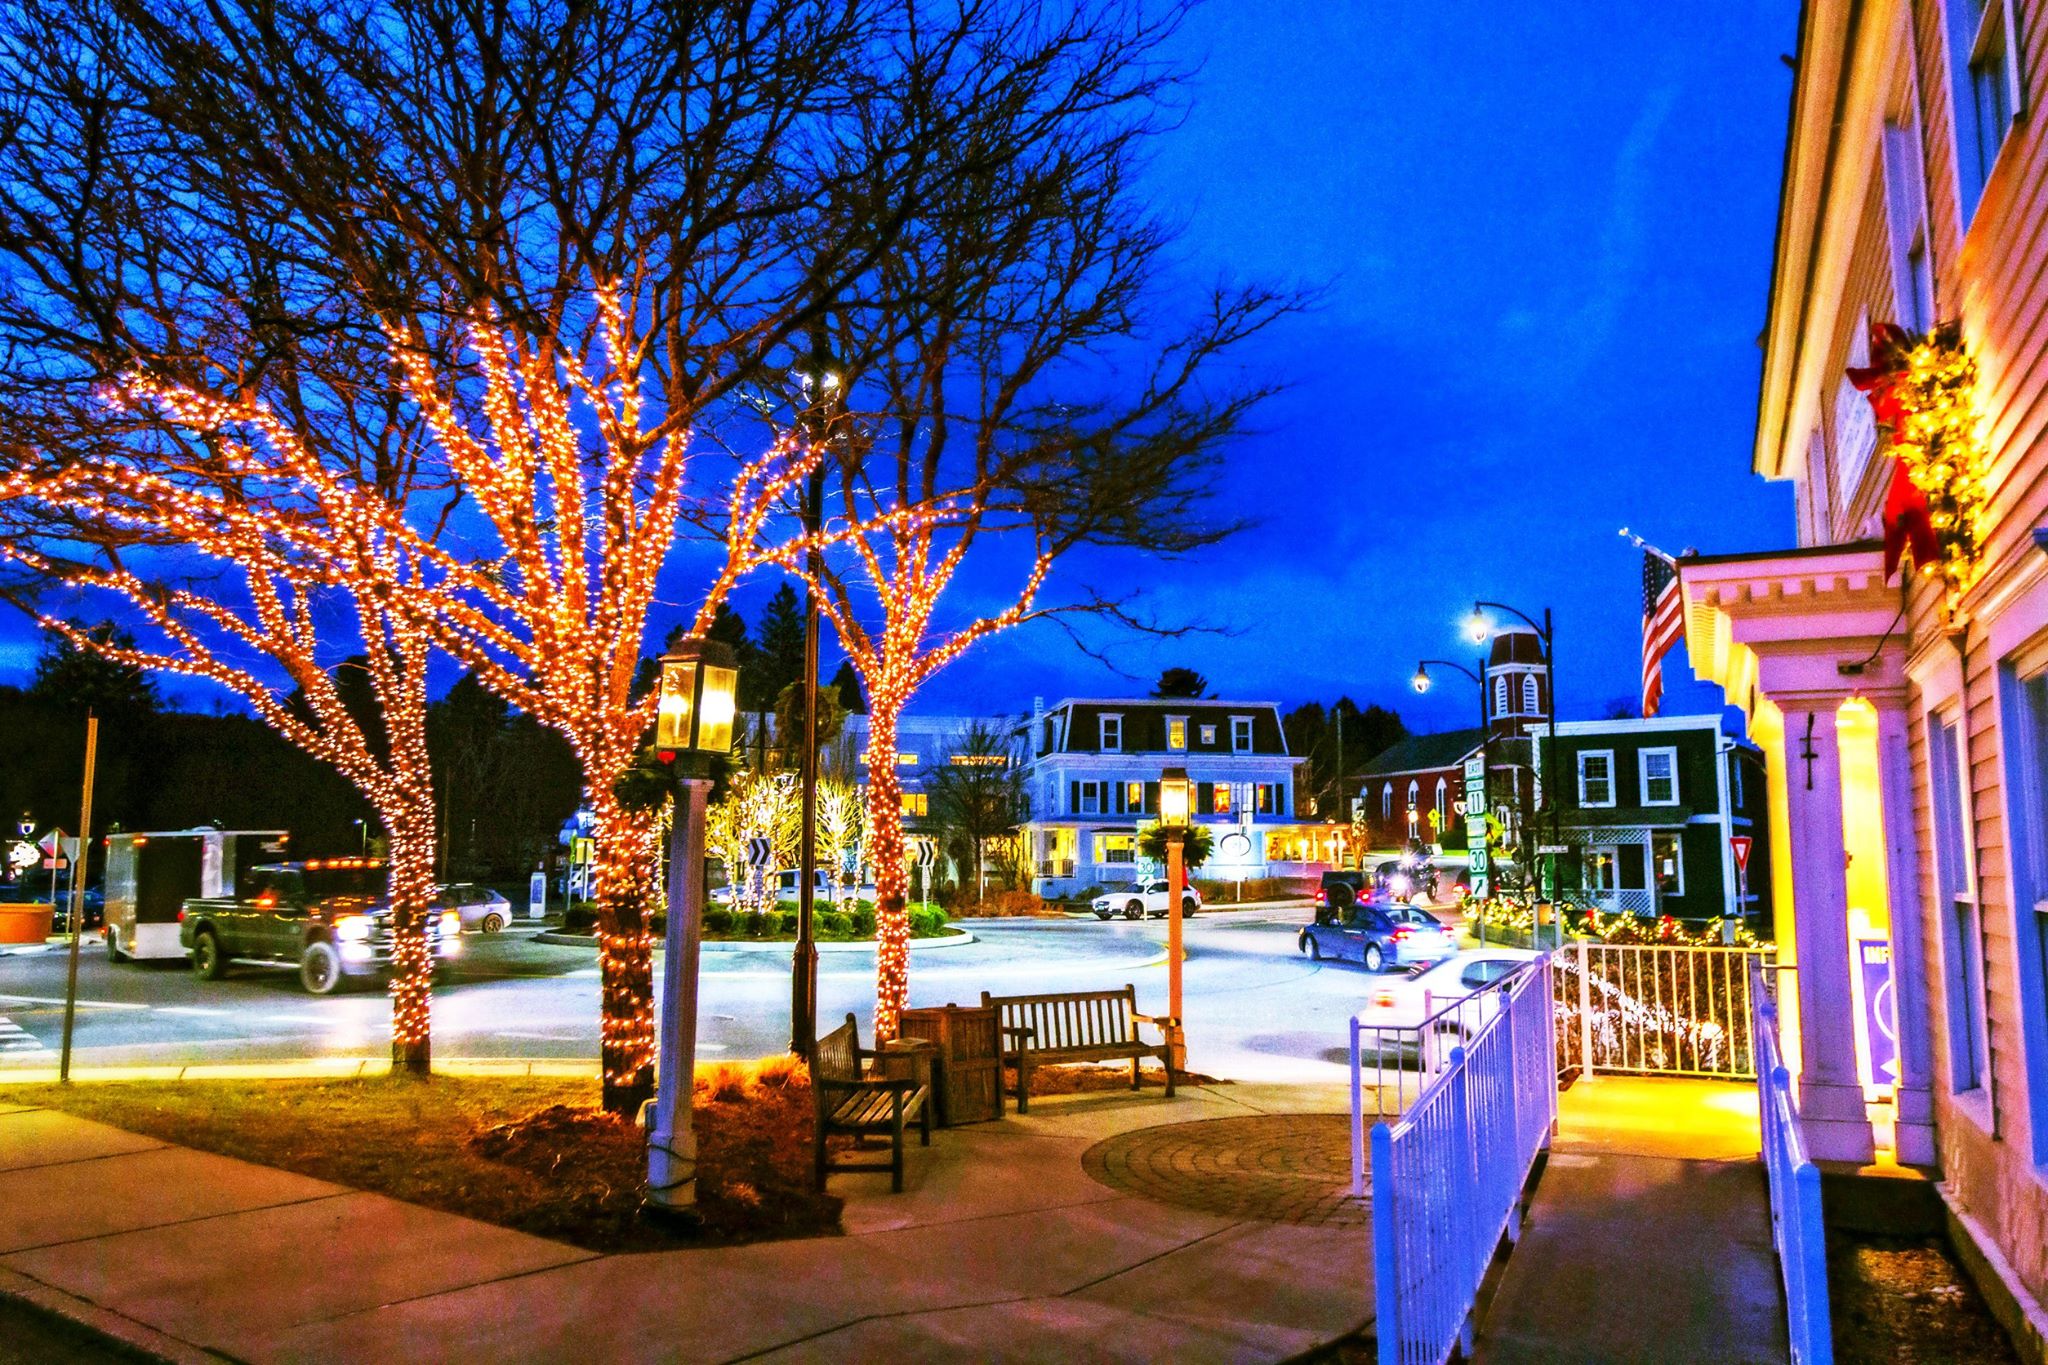 Manchester Is A Delightful Christmas Town In Vermont You'll Want To Visit